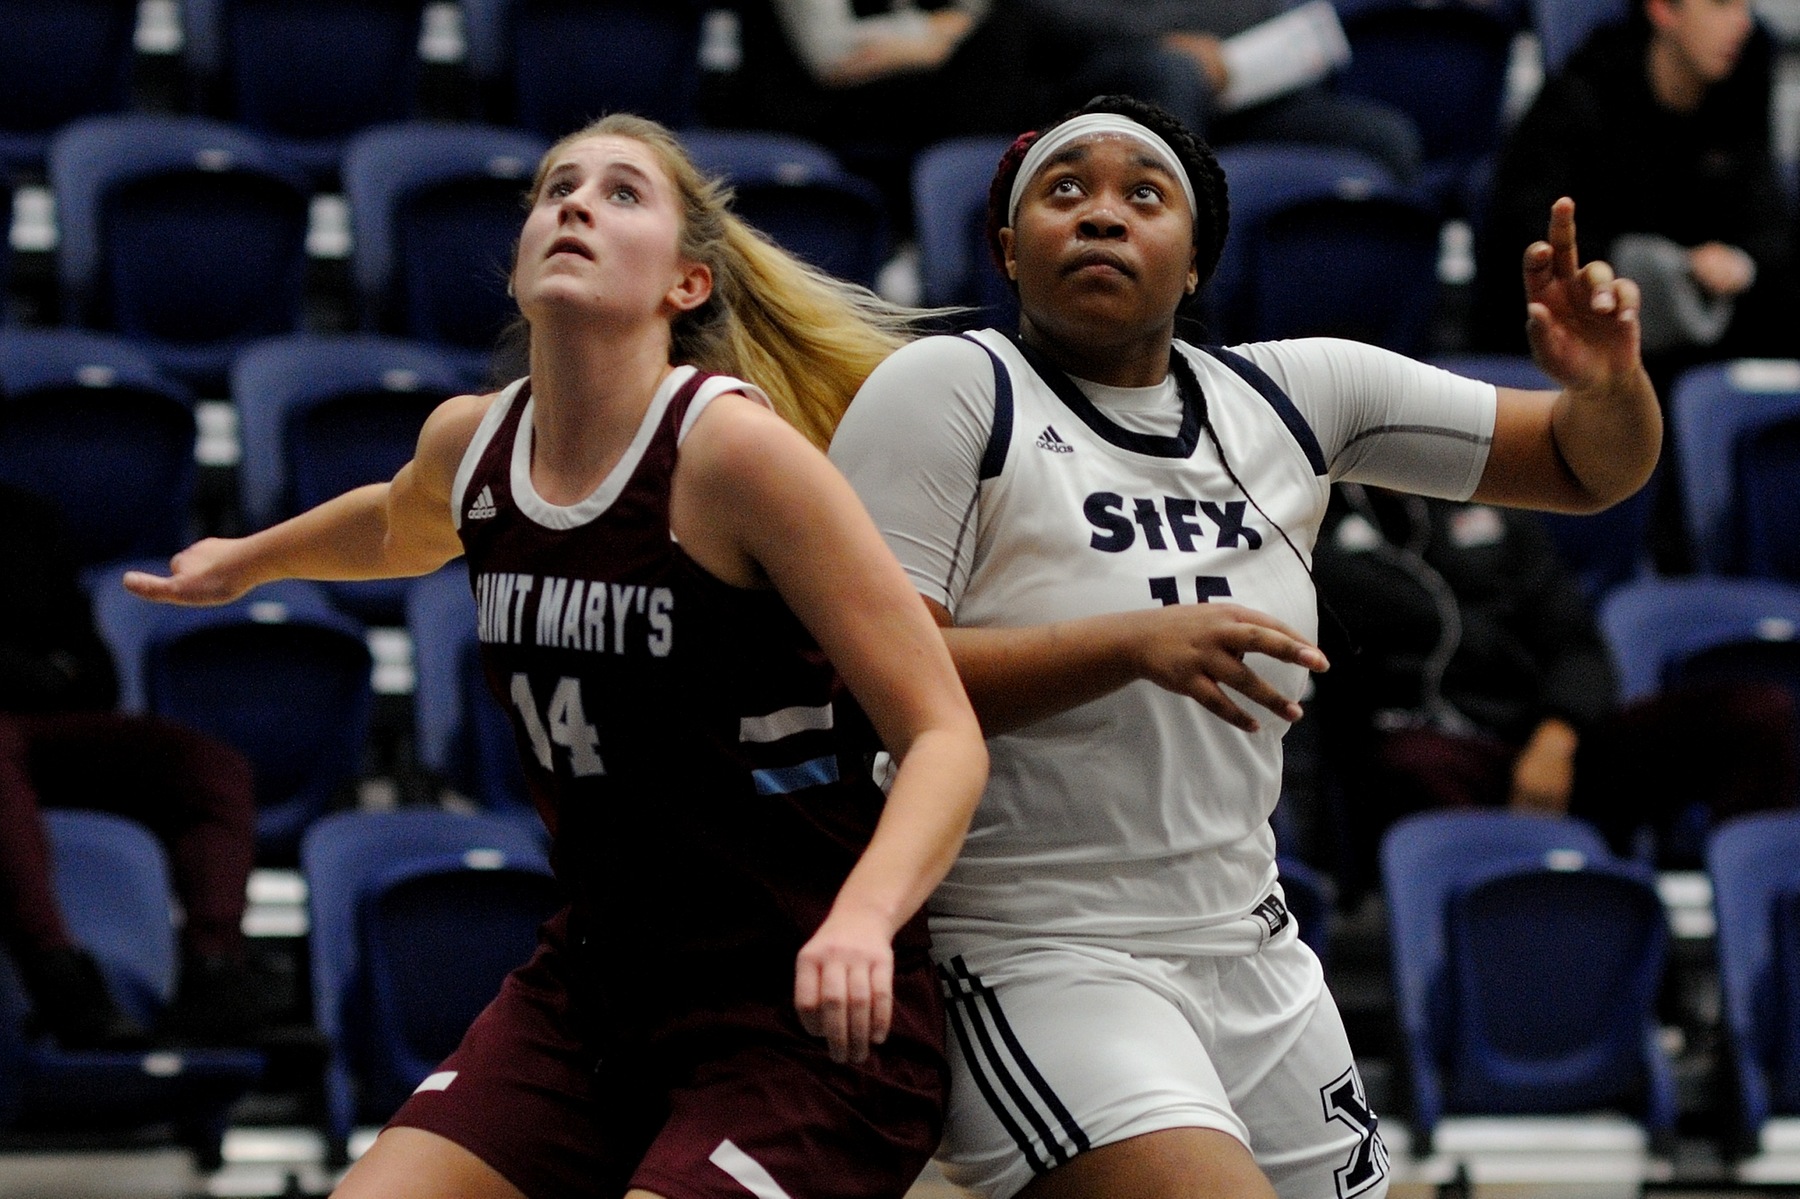 SMU's strong first quarter leads them to 70-57 win over StFX